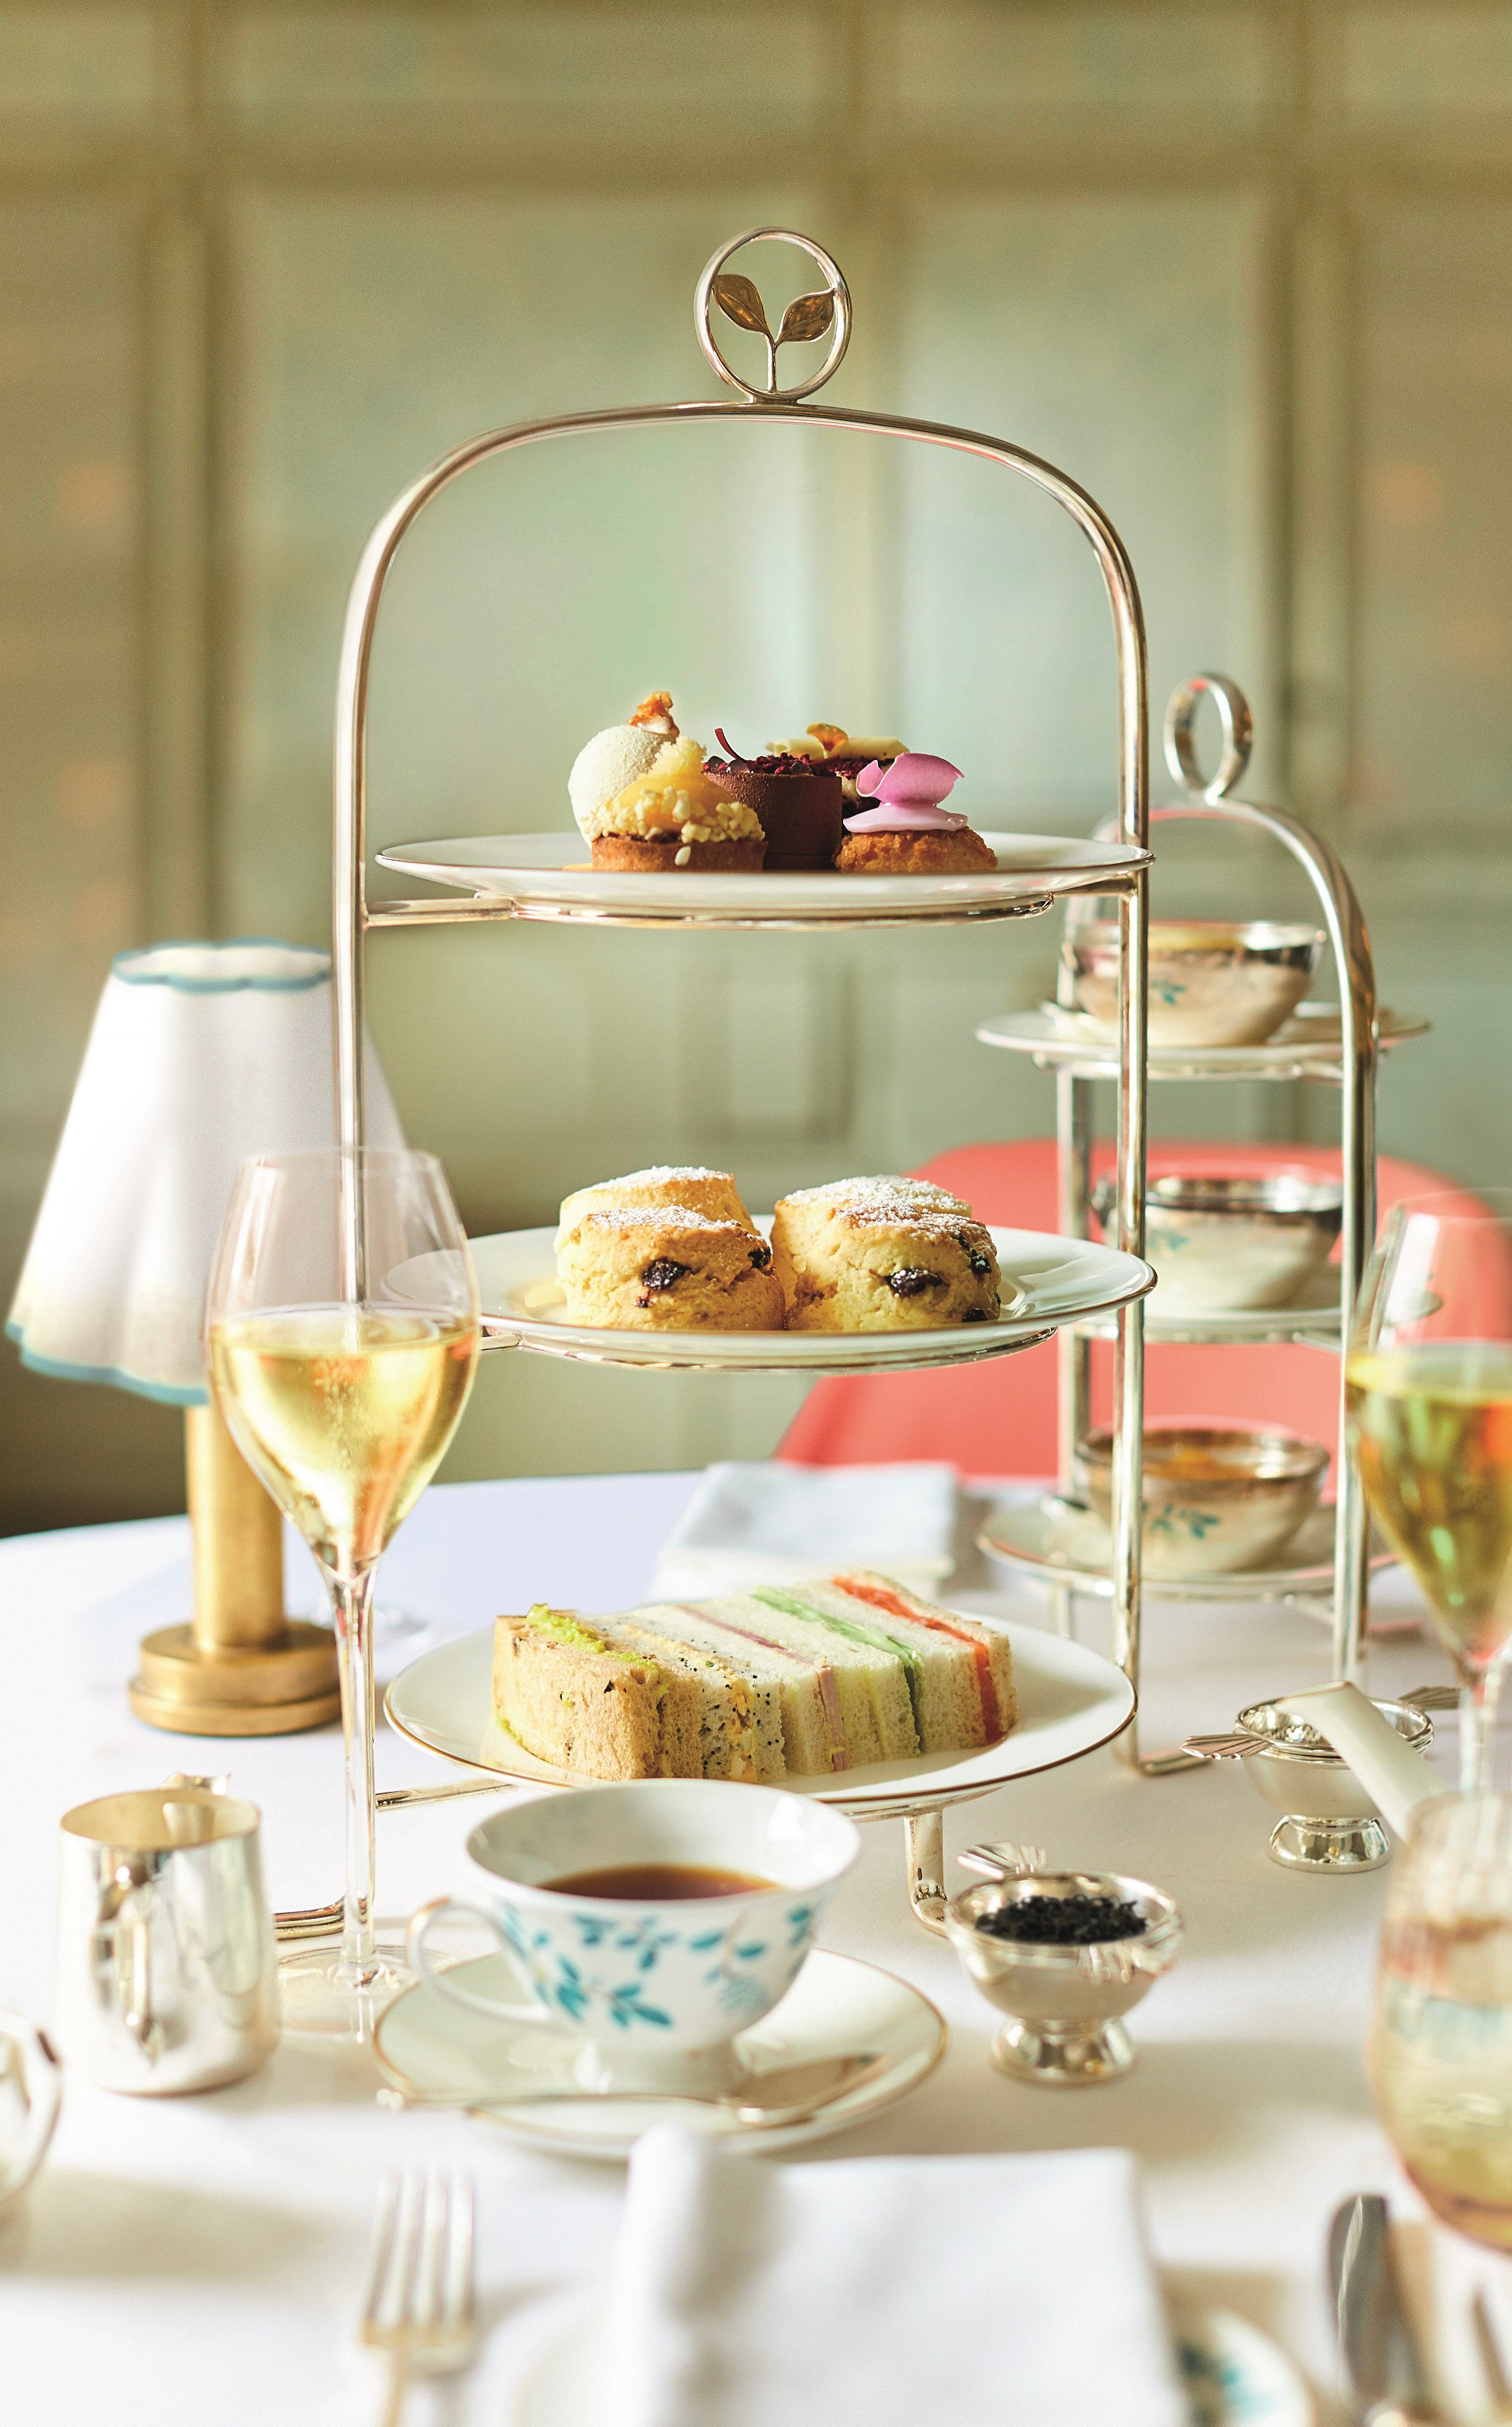 The founder of Crushed wine bar in Sai Ying Pun shares her favourite Hong Kong restaurants, including 181 at Fortnum & Mason at K11 Musea in Tsim Sha Tsui for the afternoon tea set. Photo: 181 at Fortnum & Mason
